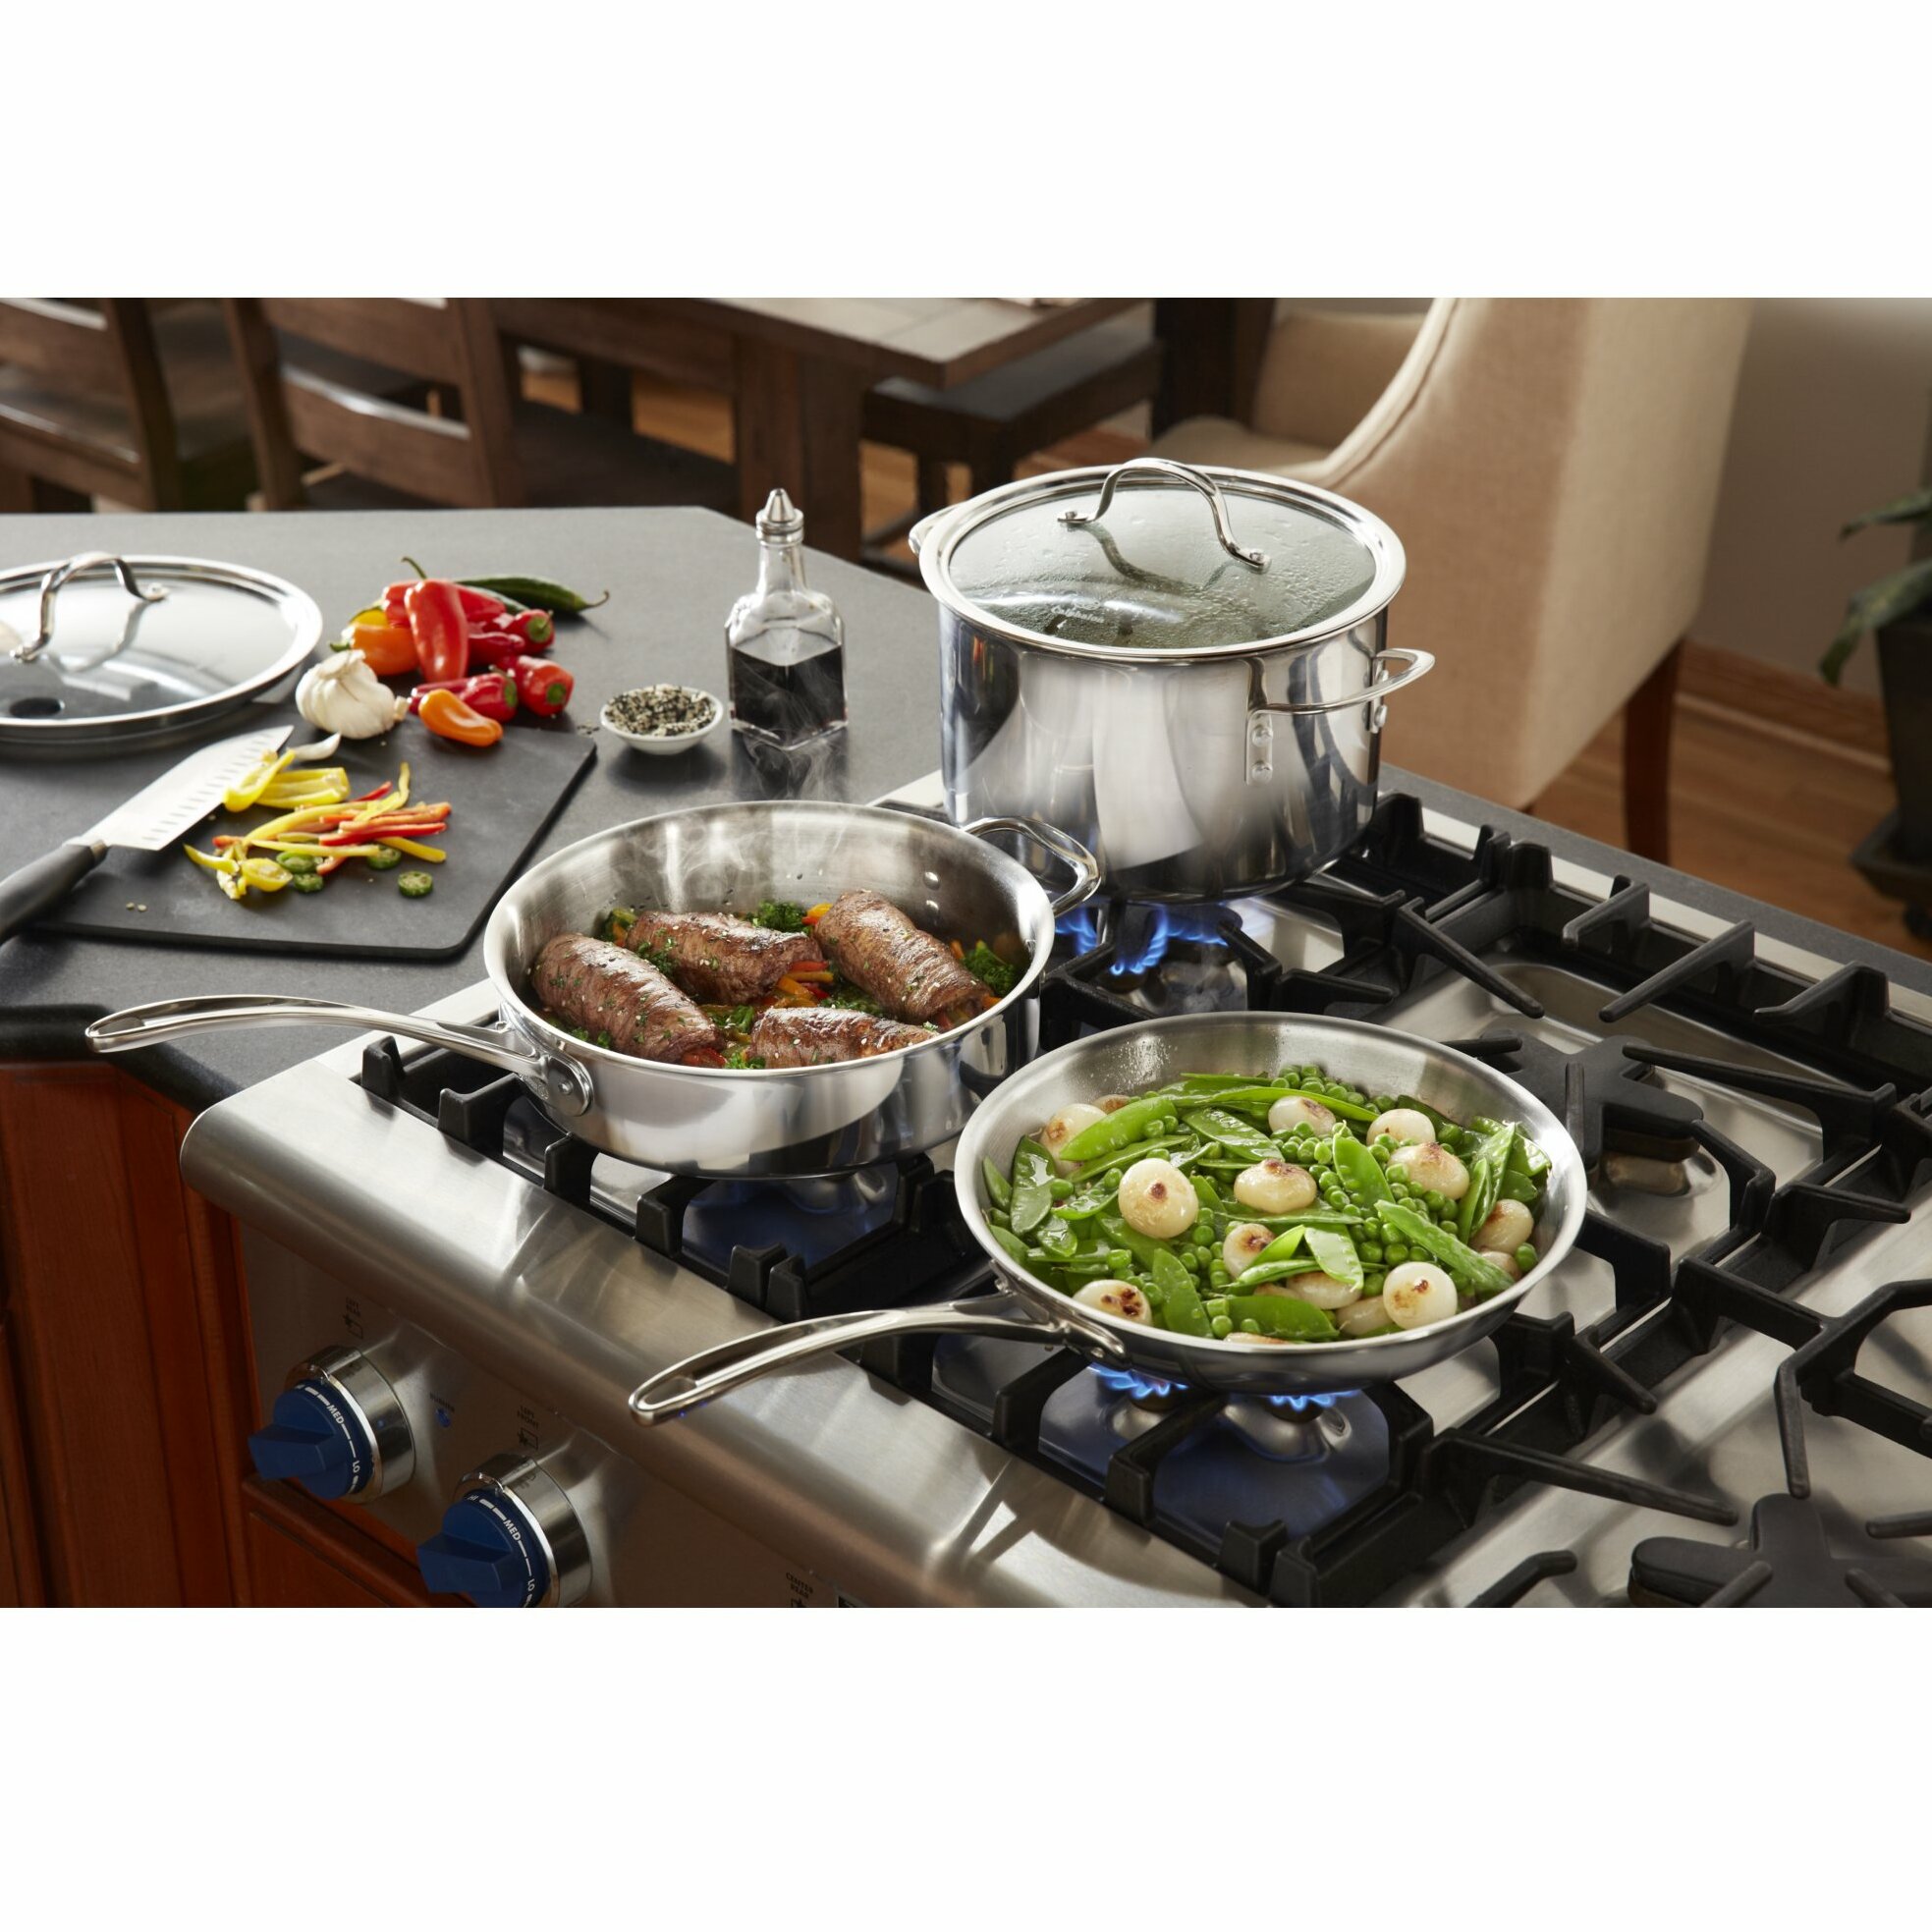 Calphalon Tri-Ply Stainless Steel 13 Piece Cookware Set & Reviews | Wayfair Calphalon Tri Ply Stainless Steel 13 Piece Cookware Set